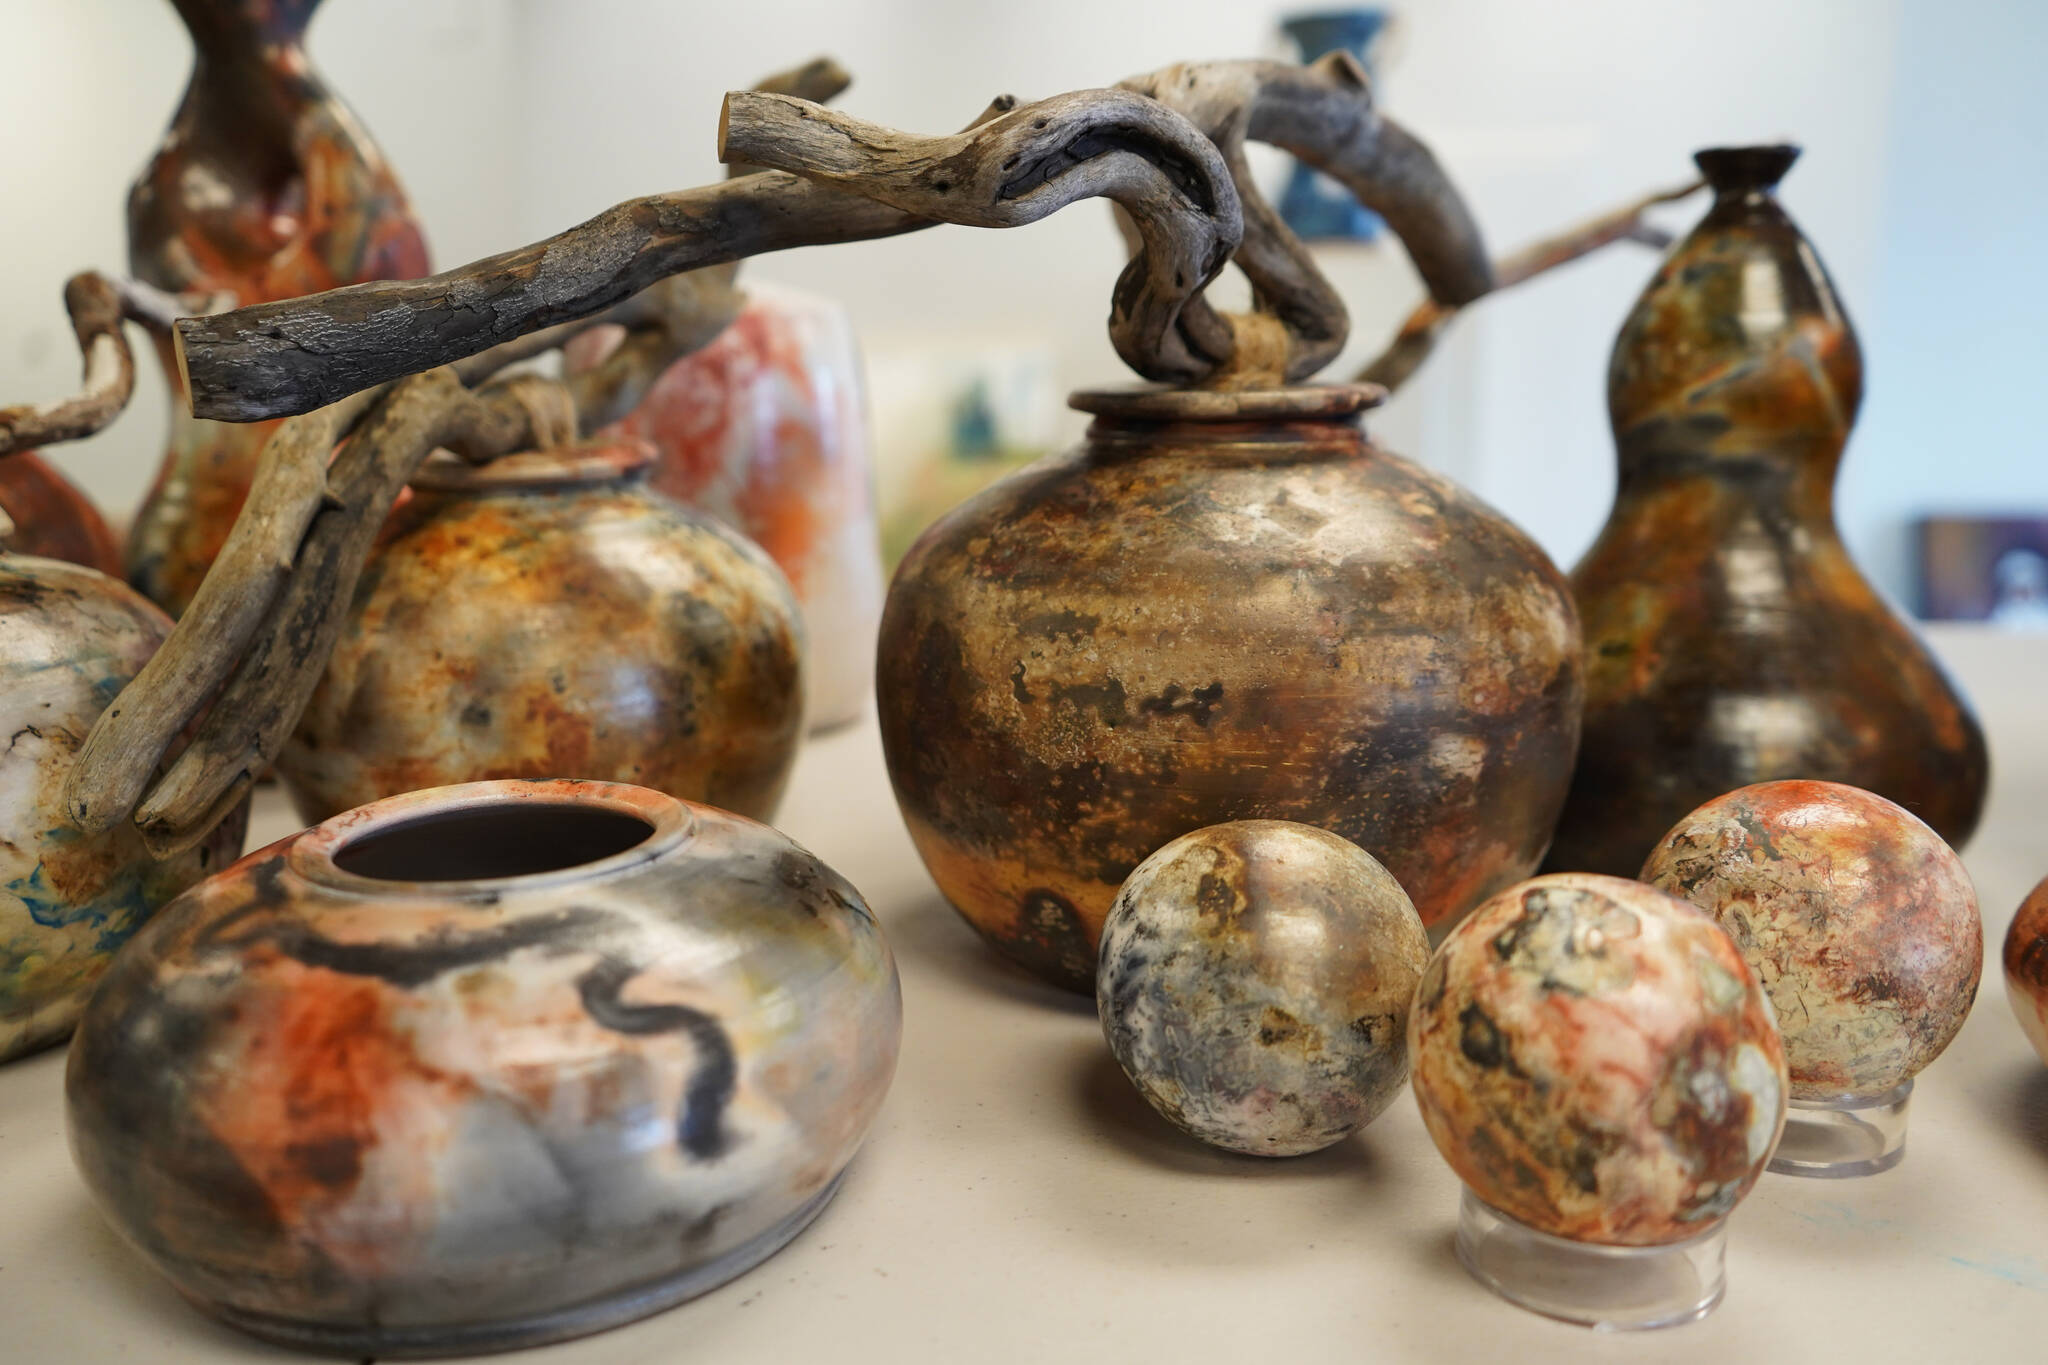 Several sculptures by Shannon Olds wait to be placed as part of “Making Her Mark,” the June show at the Kenai Art Center in Kenai, Alaska, on Tuesday, May 30, 2023. (Jake Dye/Peninsula Clarion)